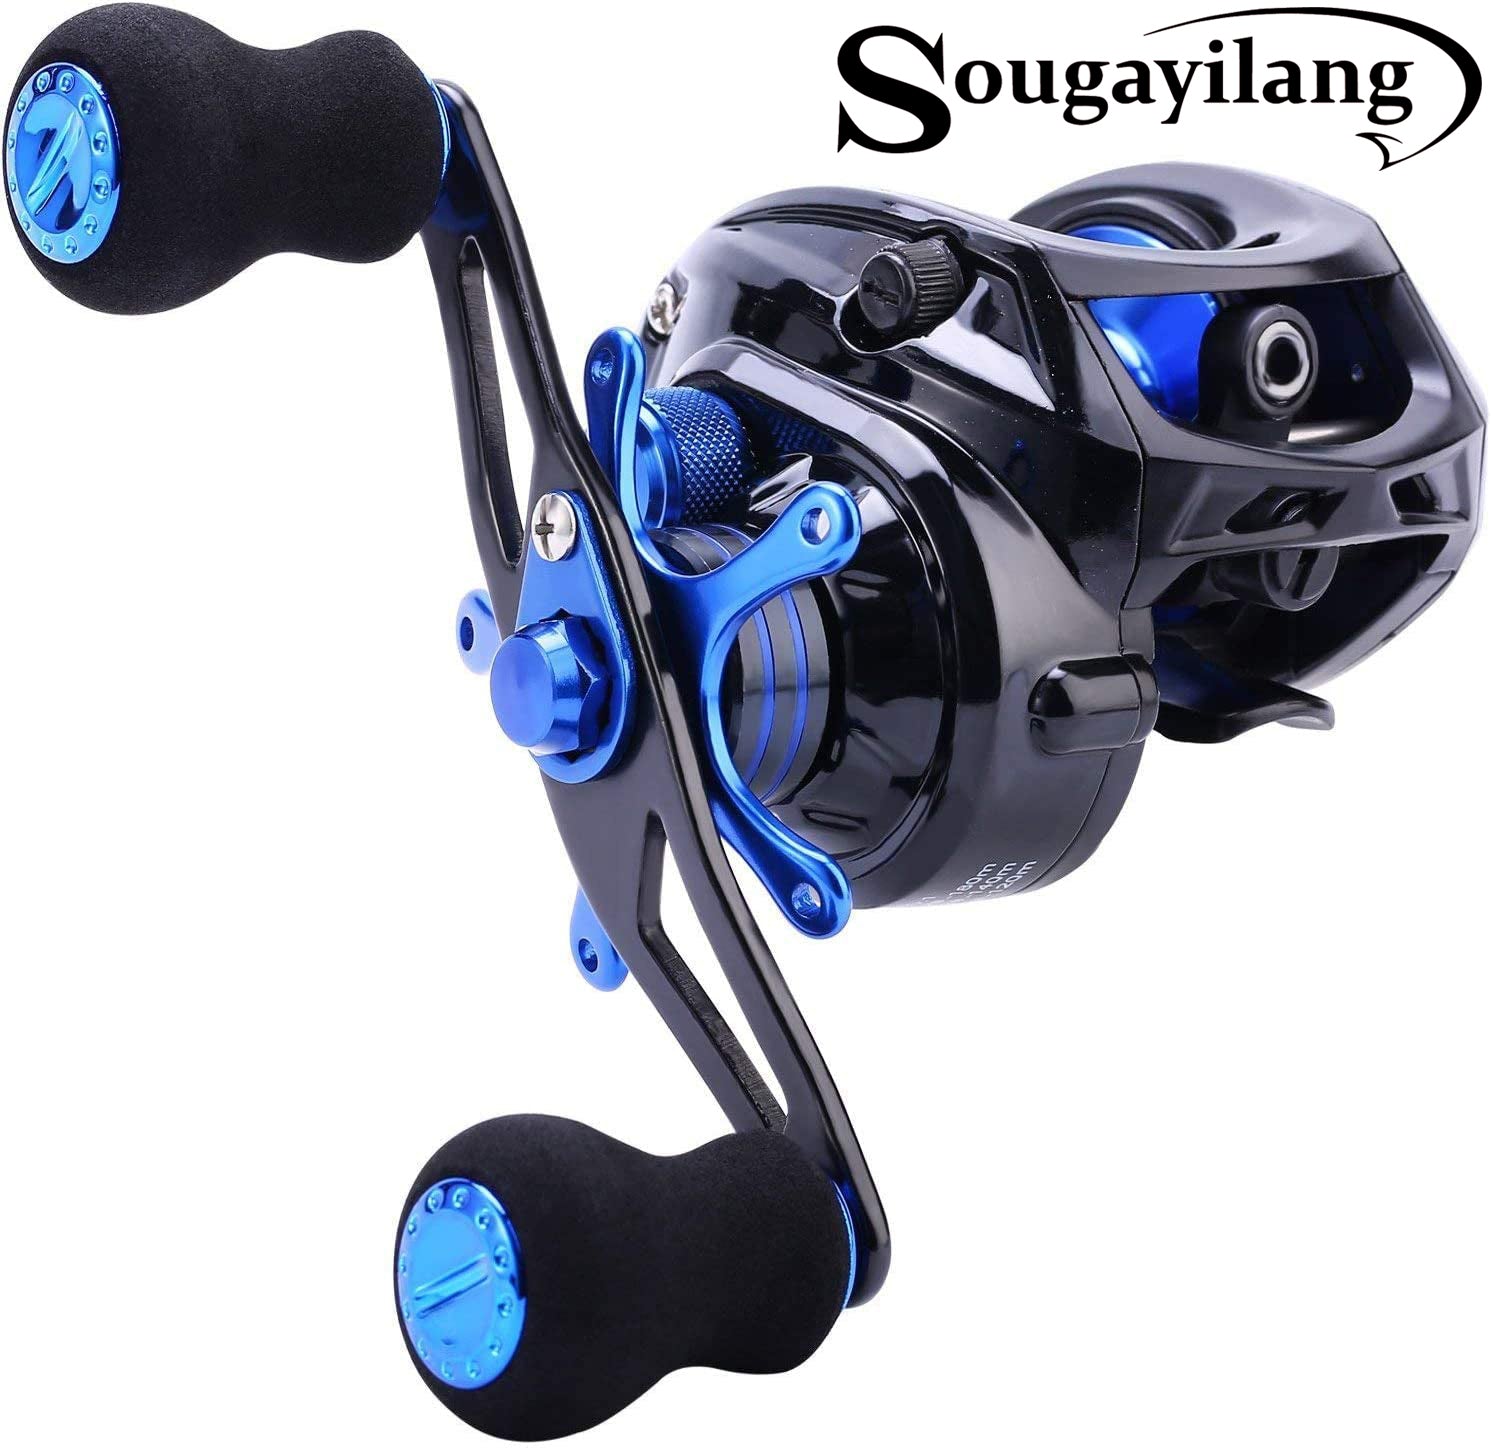 Left / Right Hand Bait Casting Fishing Reels 9+1BB Smooth Low Profile Fish  Reel